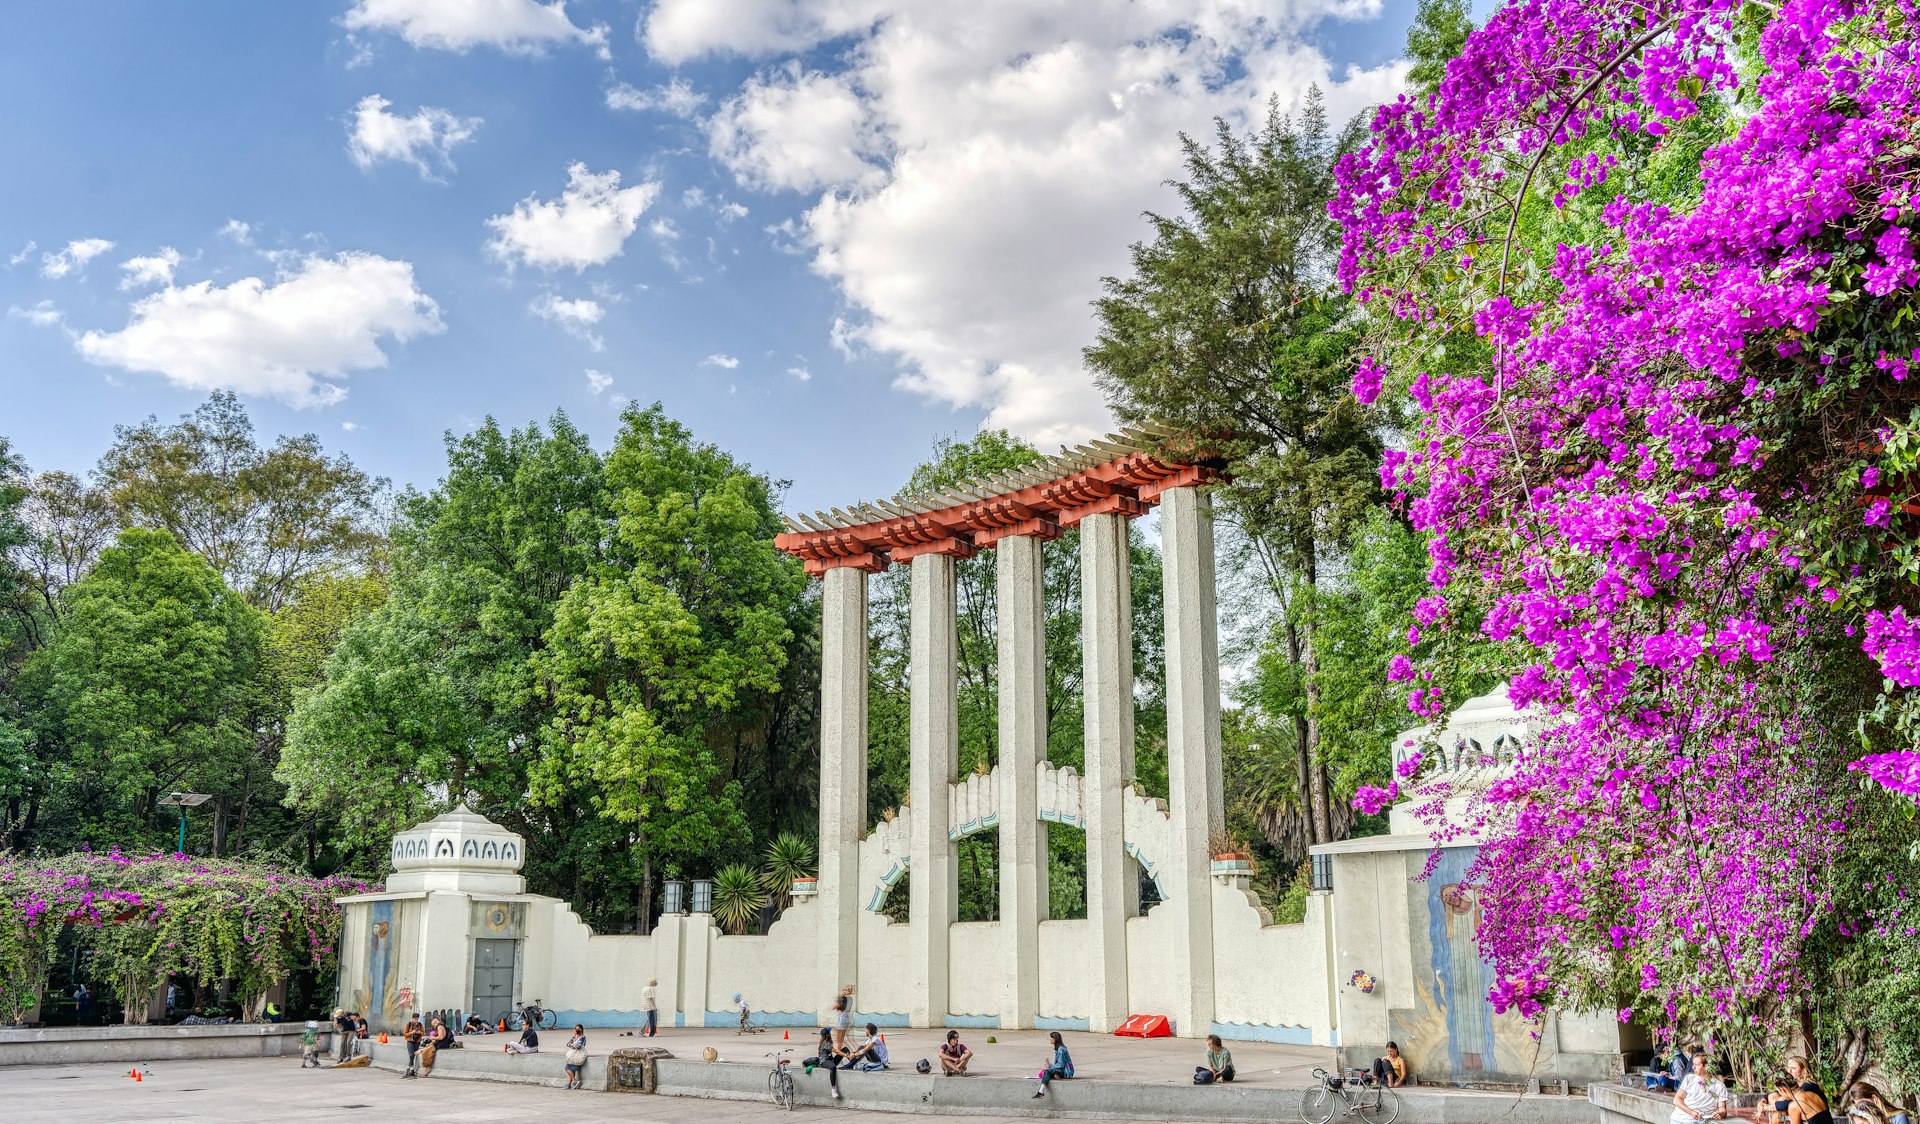 People sitting in a park in front of a giant row of columns and fucshia flowers